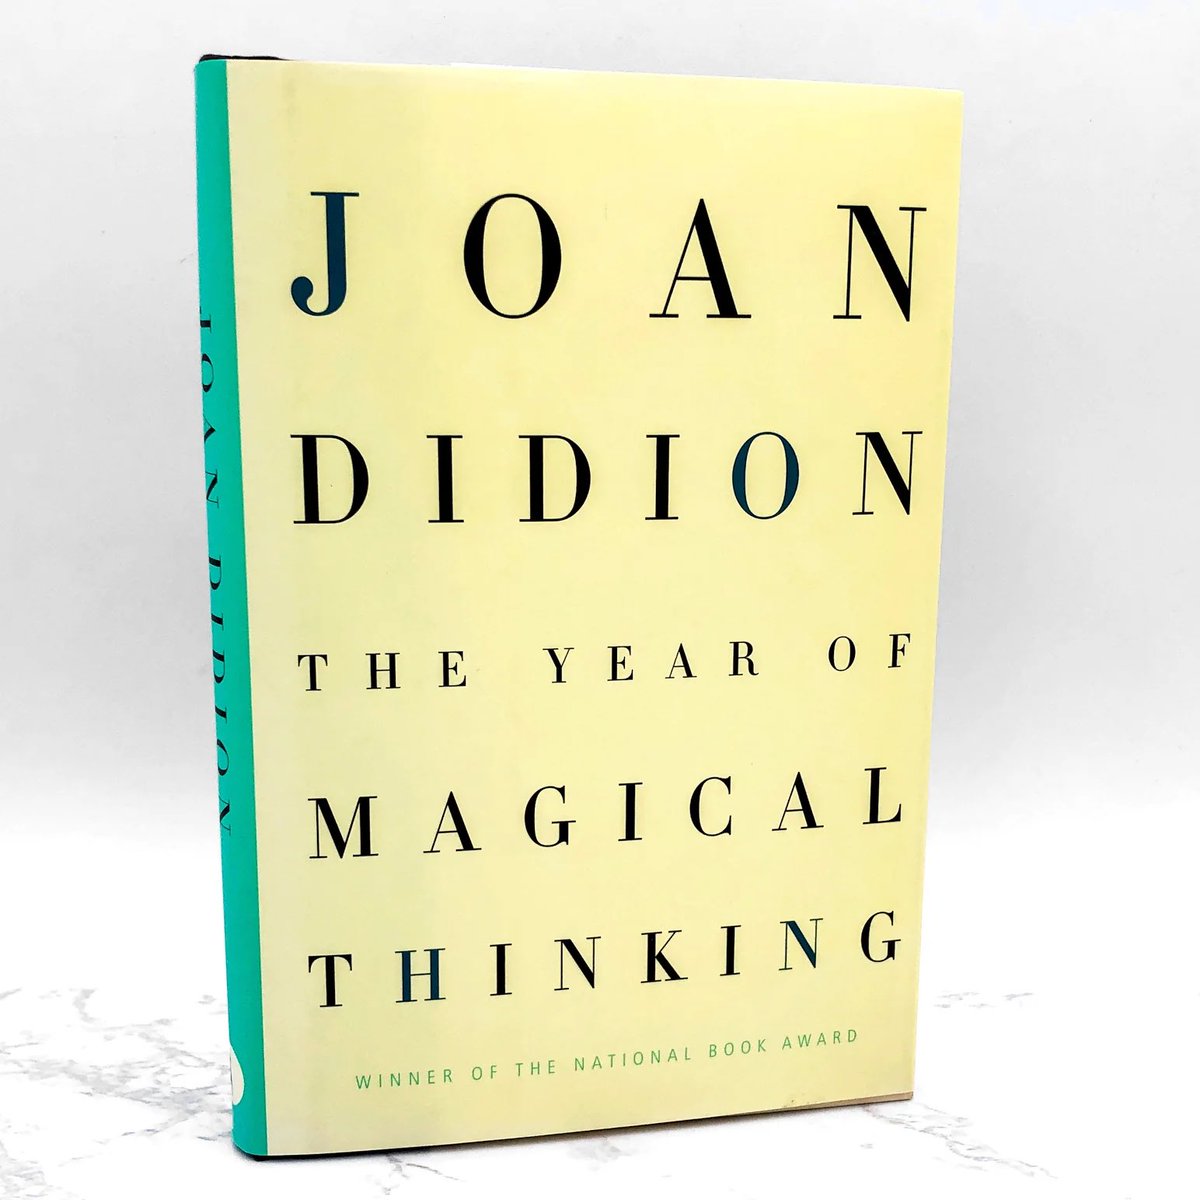 Jessica Lange revealed that she will next be starring in a movie adaptation of Joan Didion’s “The Year of Magical Thinking,” which is set to enter production in early 2025.